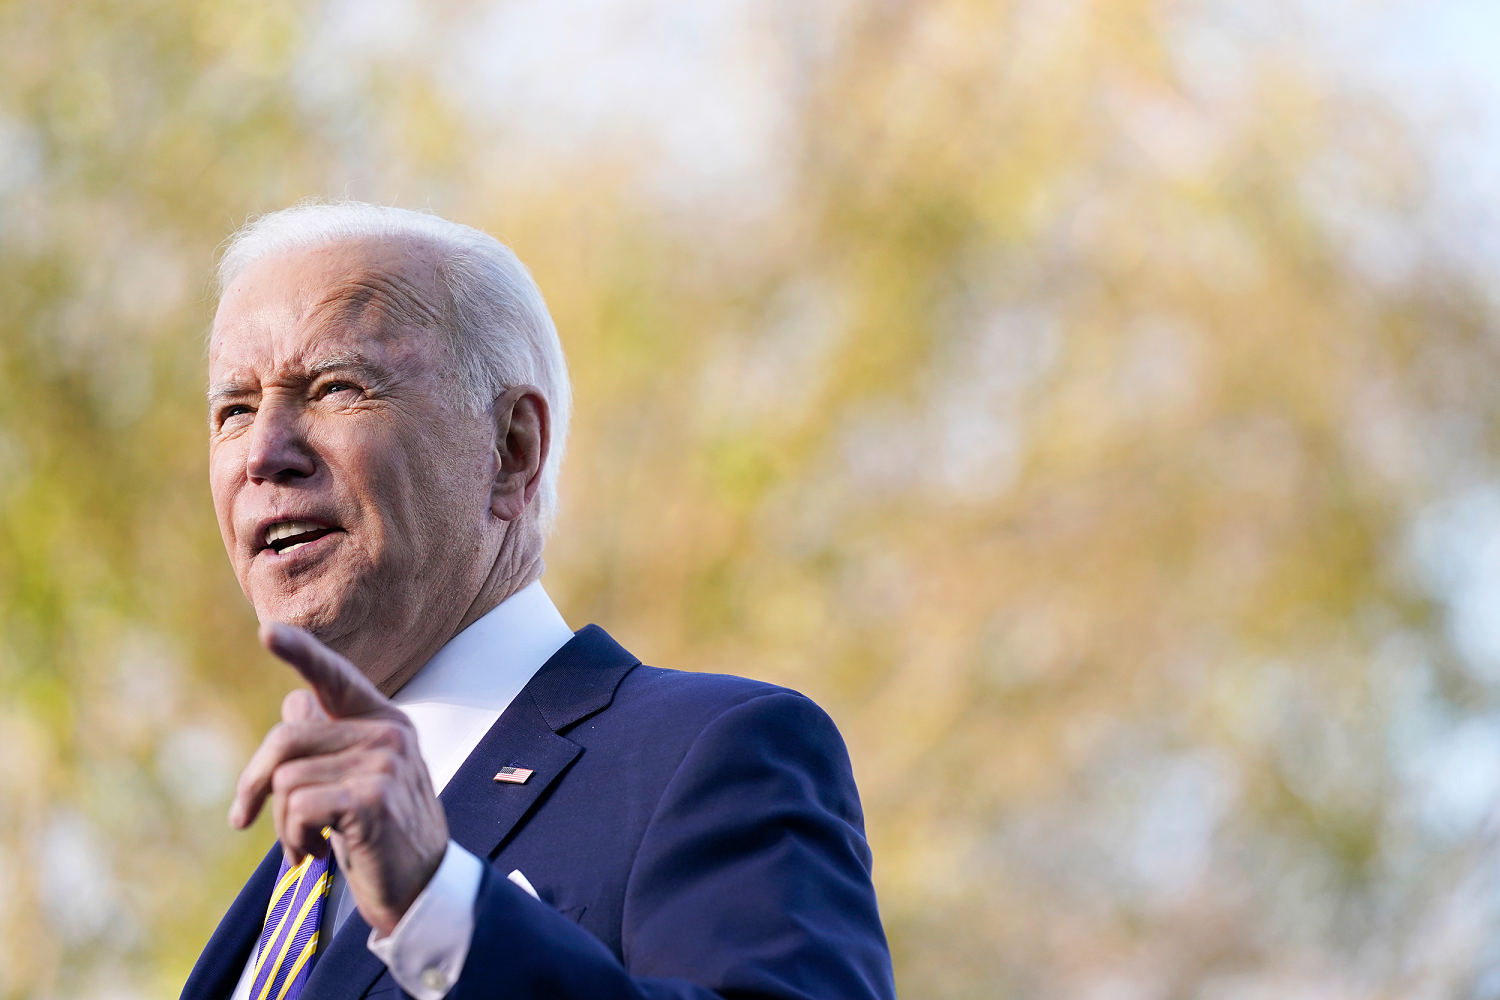 'It's on everybody's mind': Morehouse faculty and students raise concerns about Biden's graduation speech